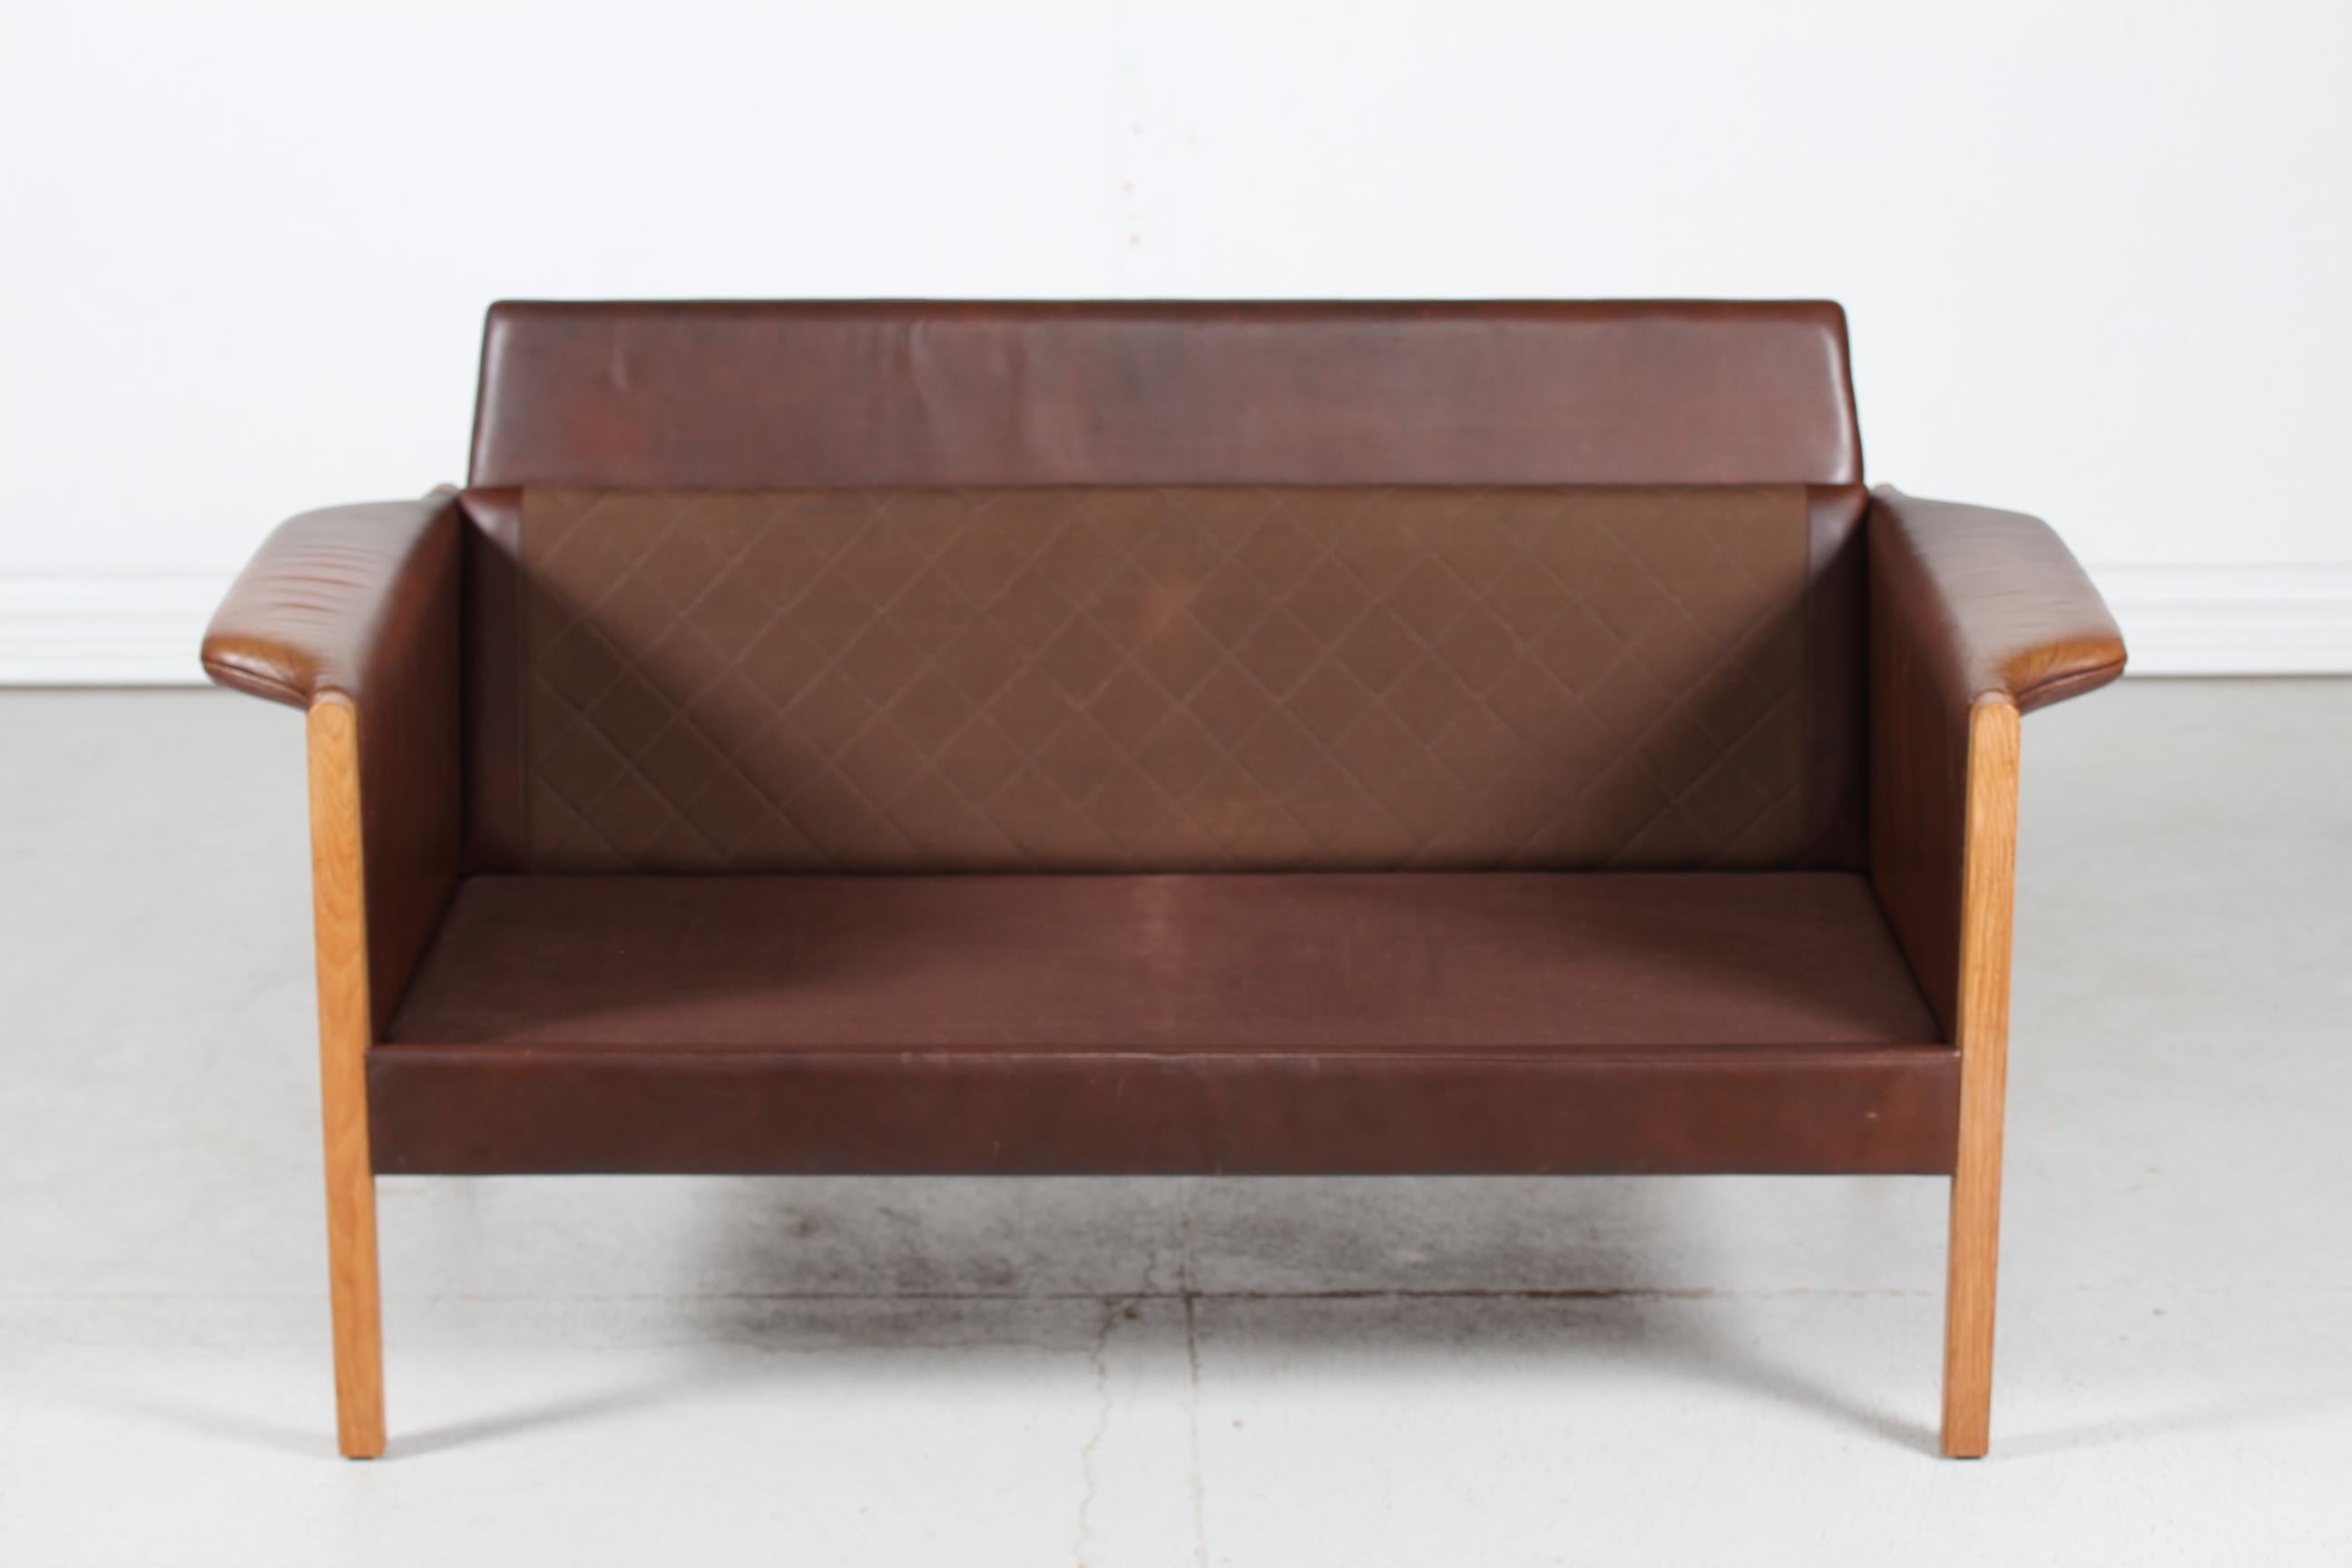 Finn Juhl style Two-Seat Sofa with Dark Cognac-Colored Leather Made in Denmark For Sale 6